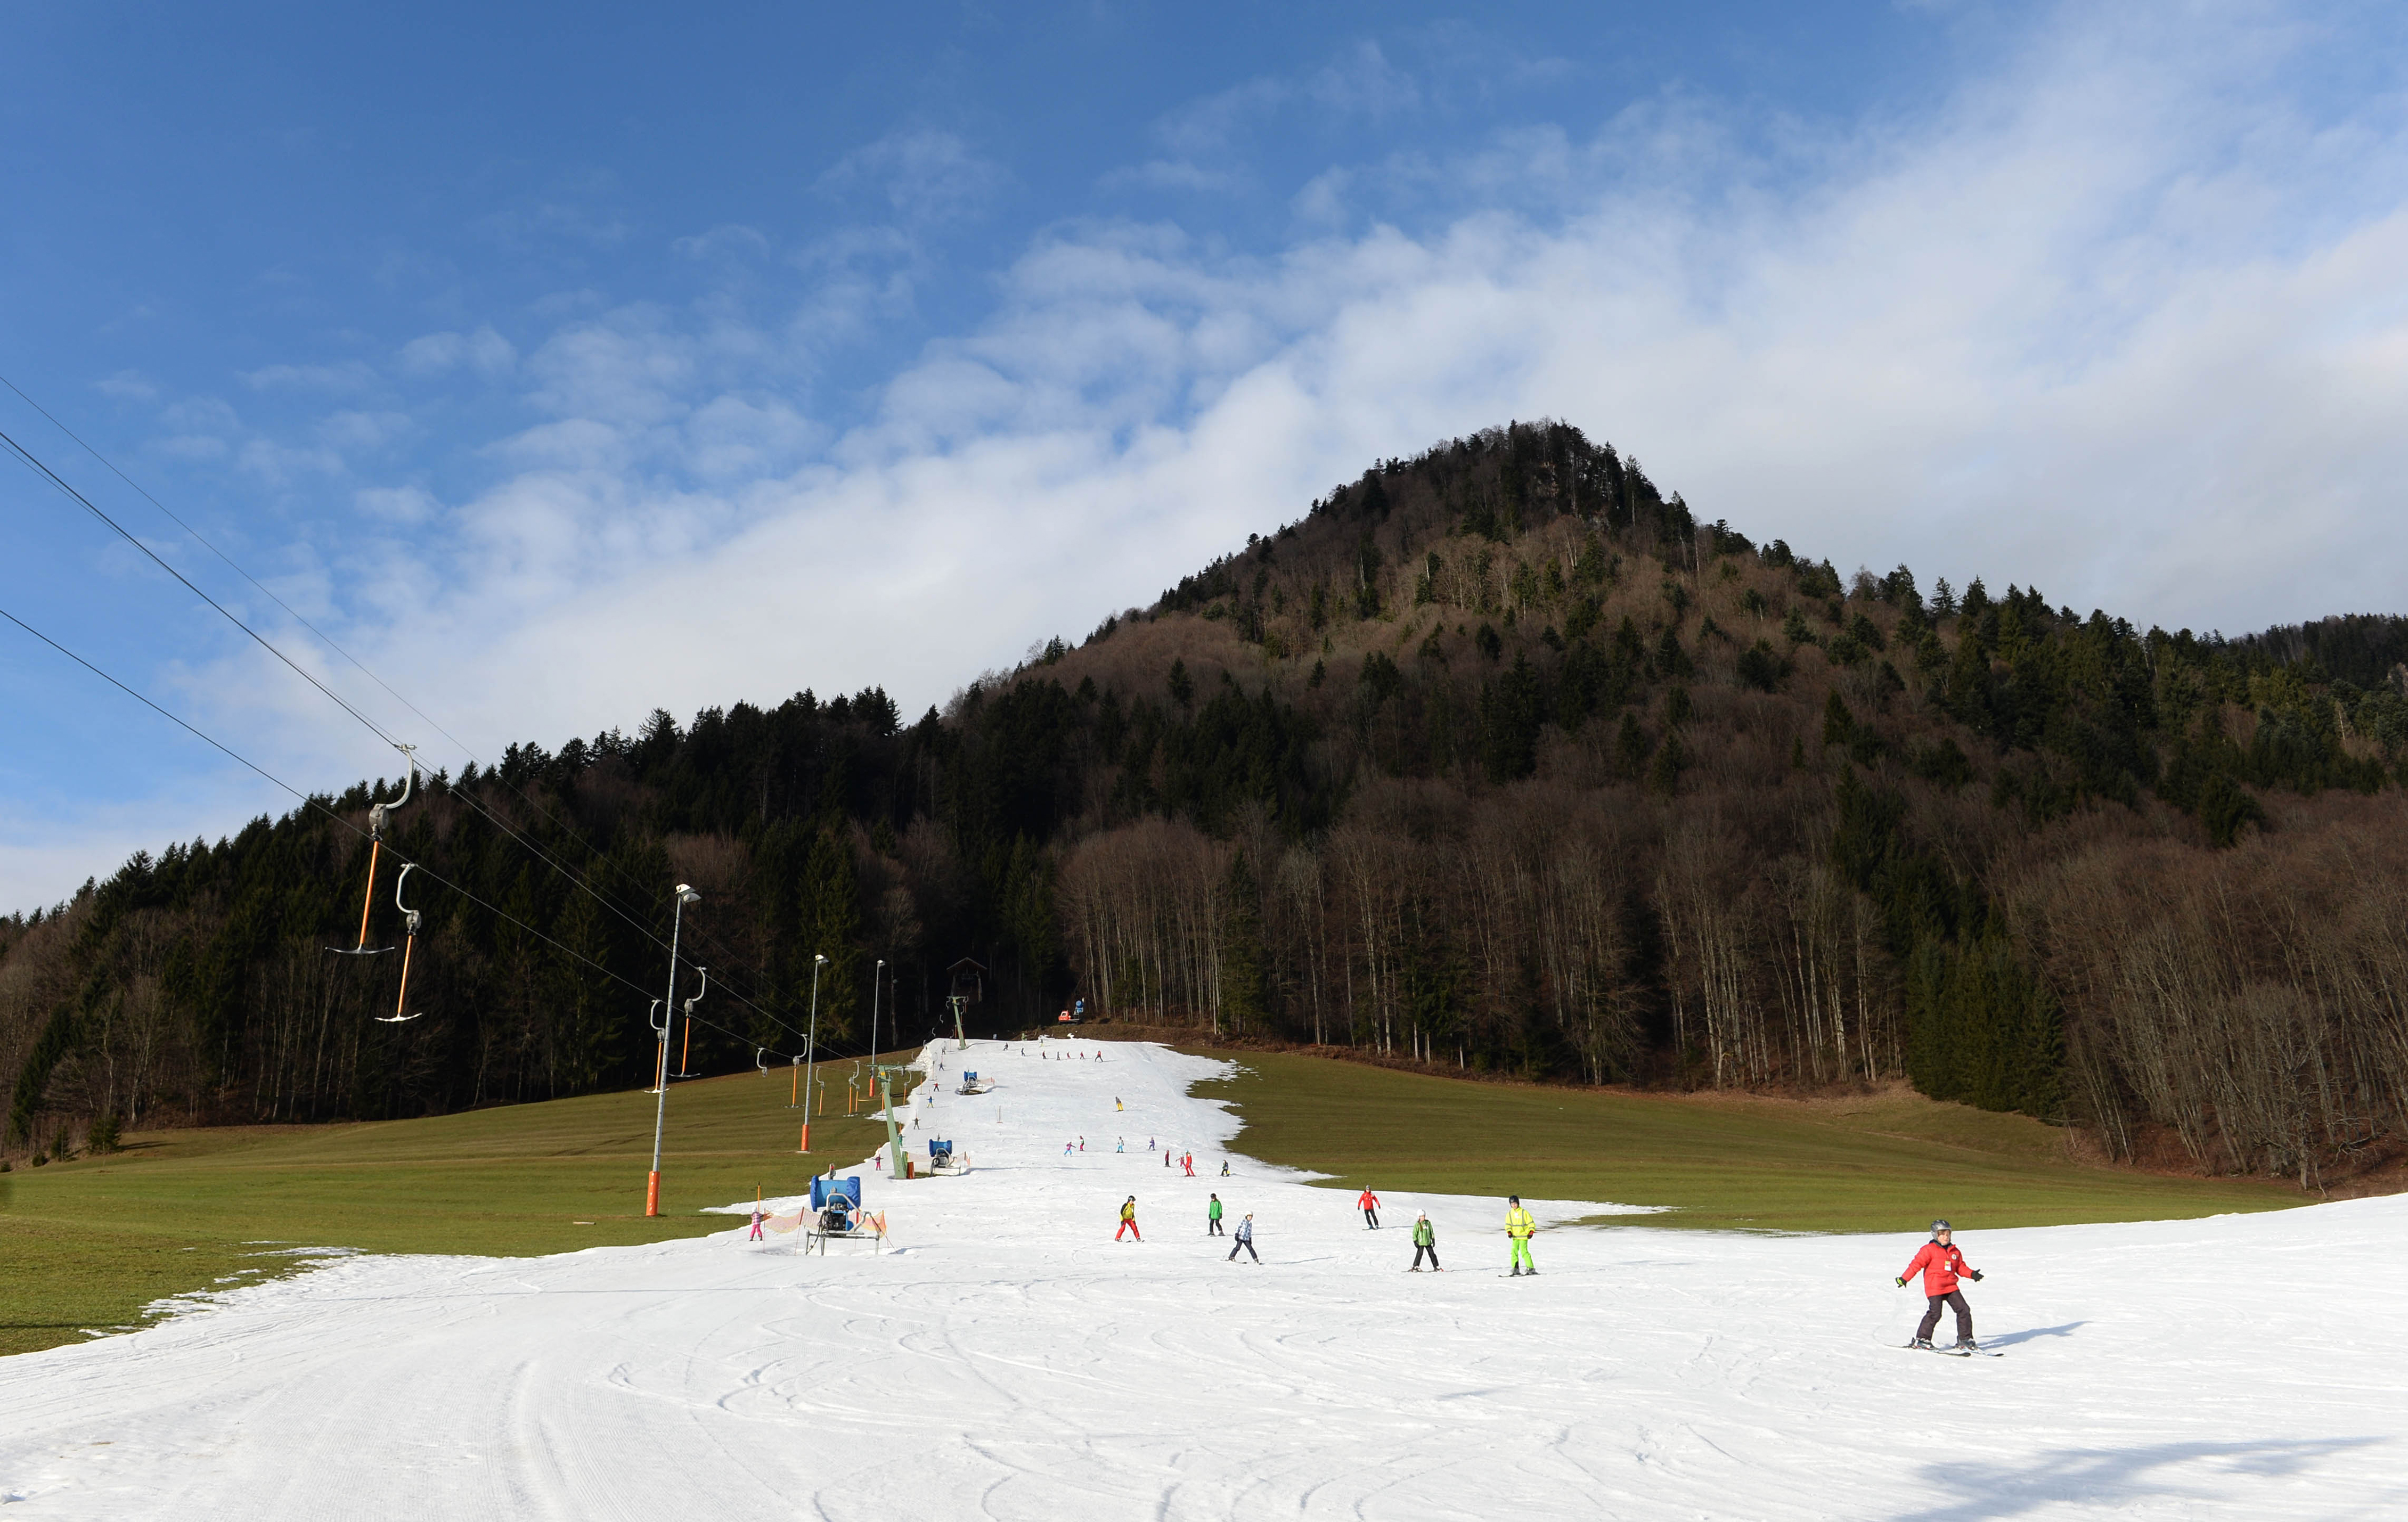 Artificial snow on a skiing slope